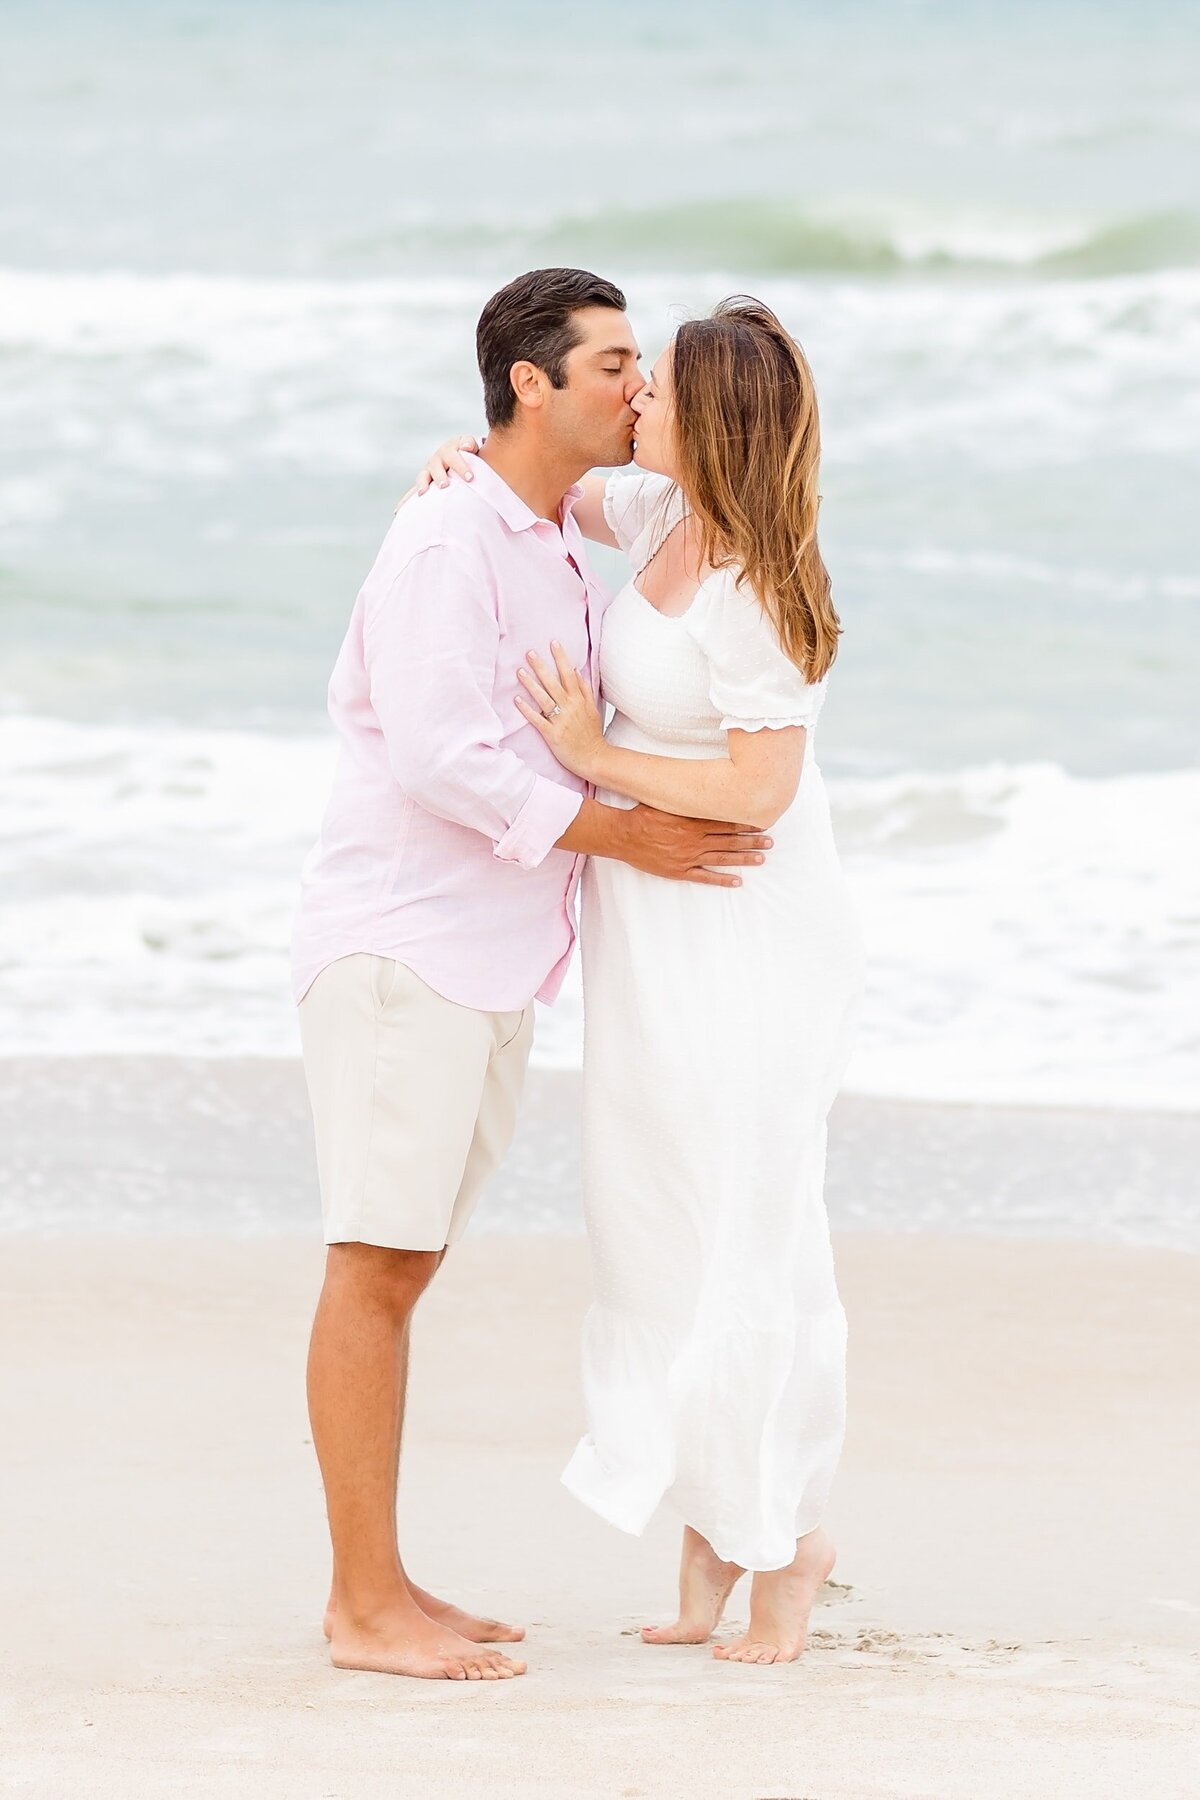 Husband kisses expected wife on the beach